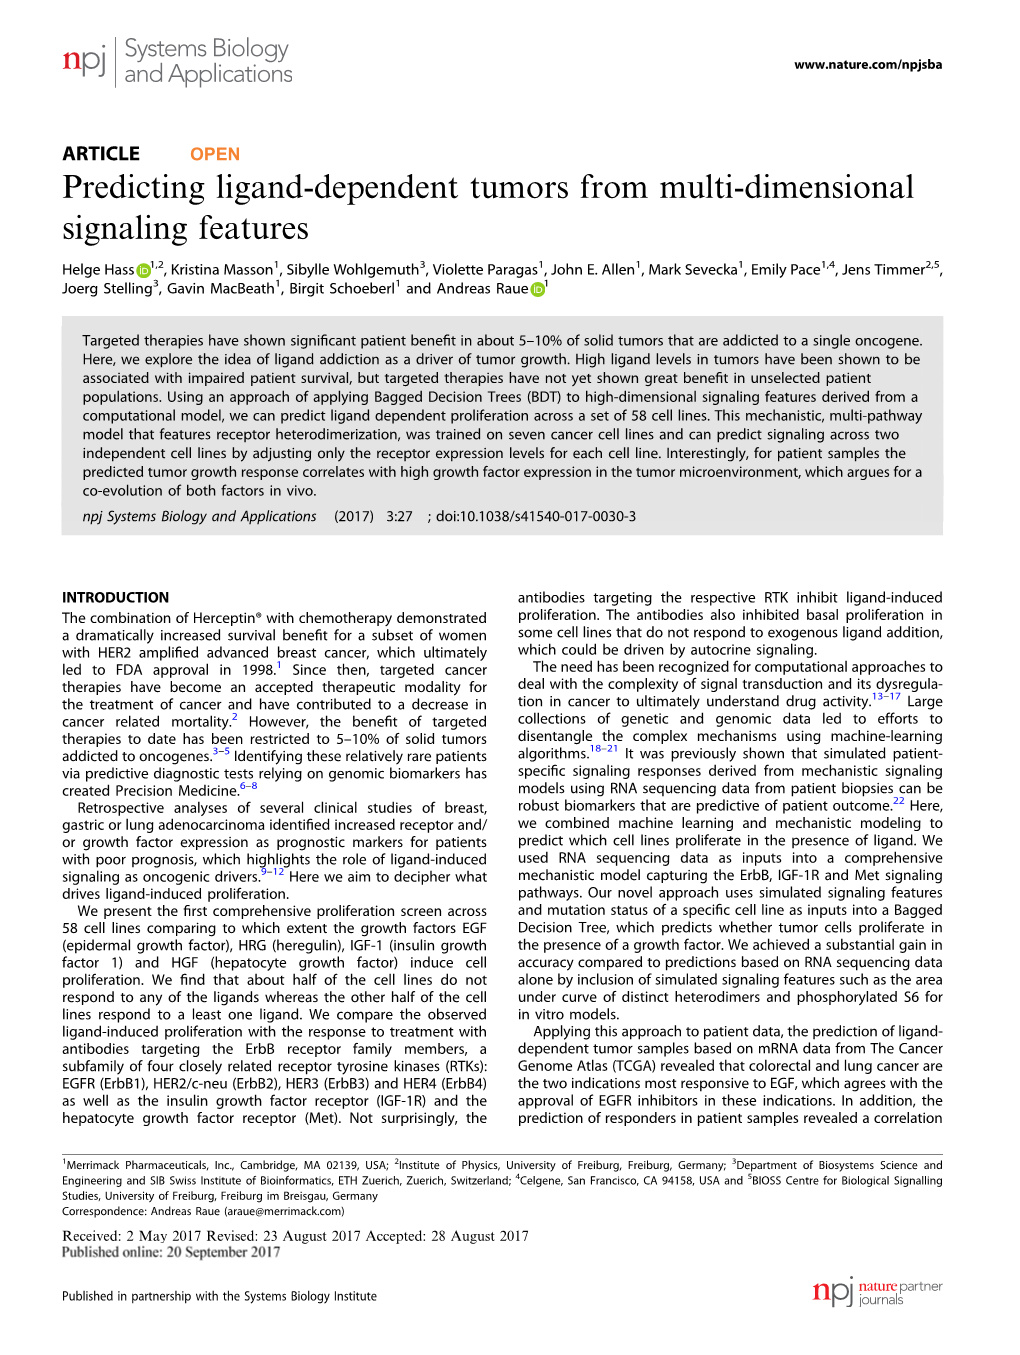 Predicting Ligand-Dependent Tumors from Simulated Signaling Features